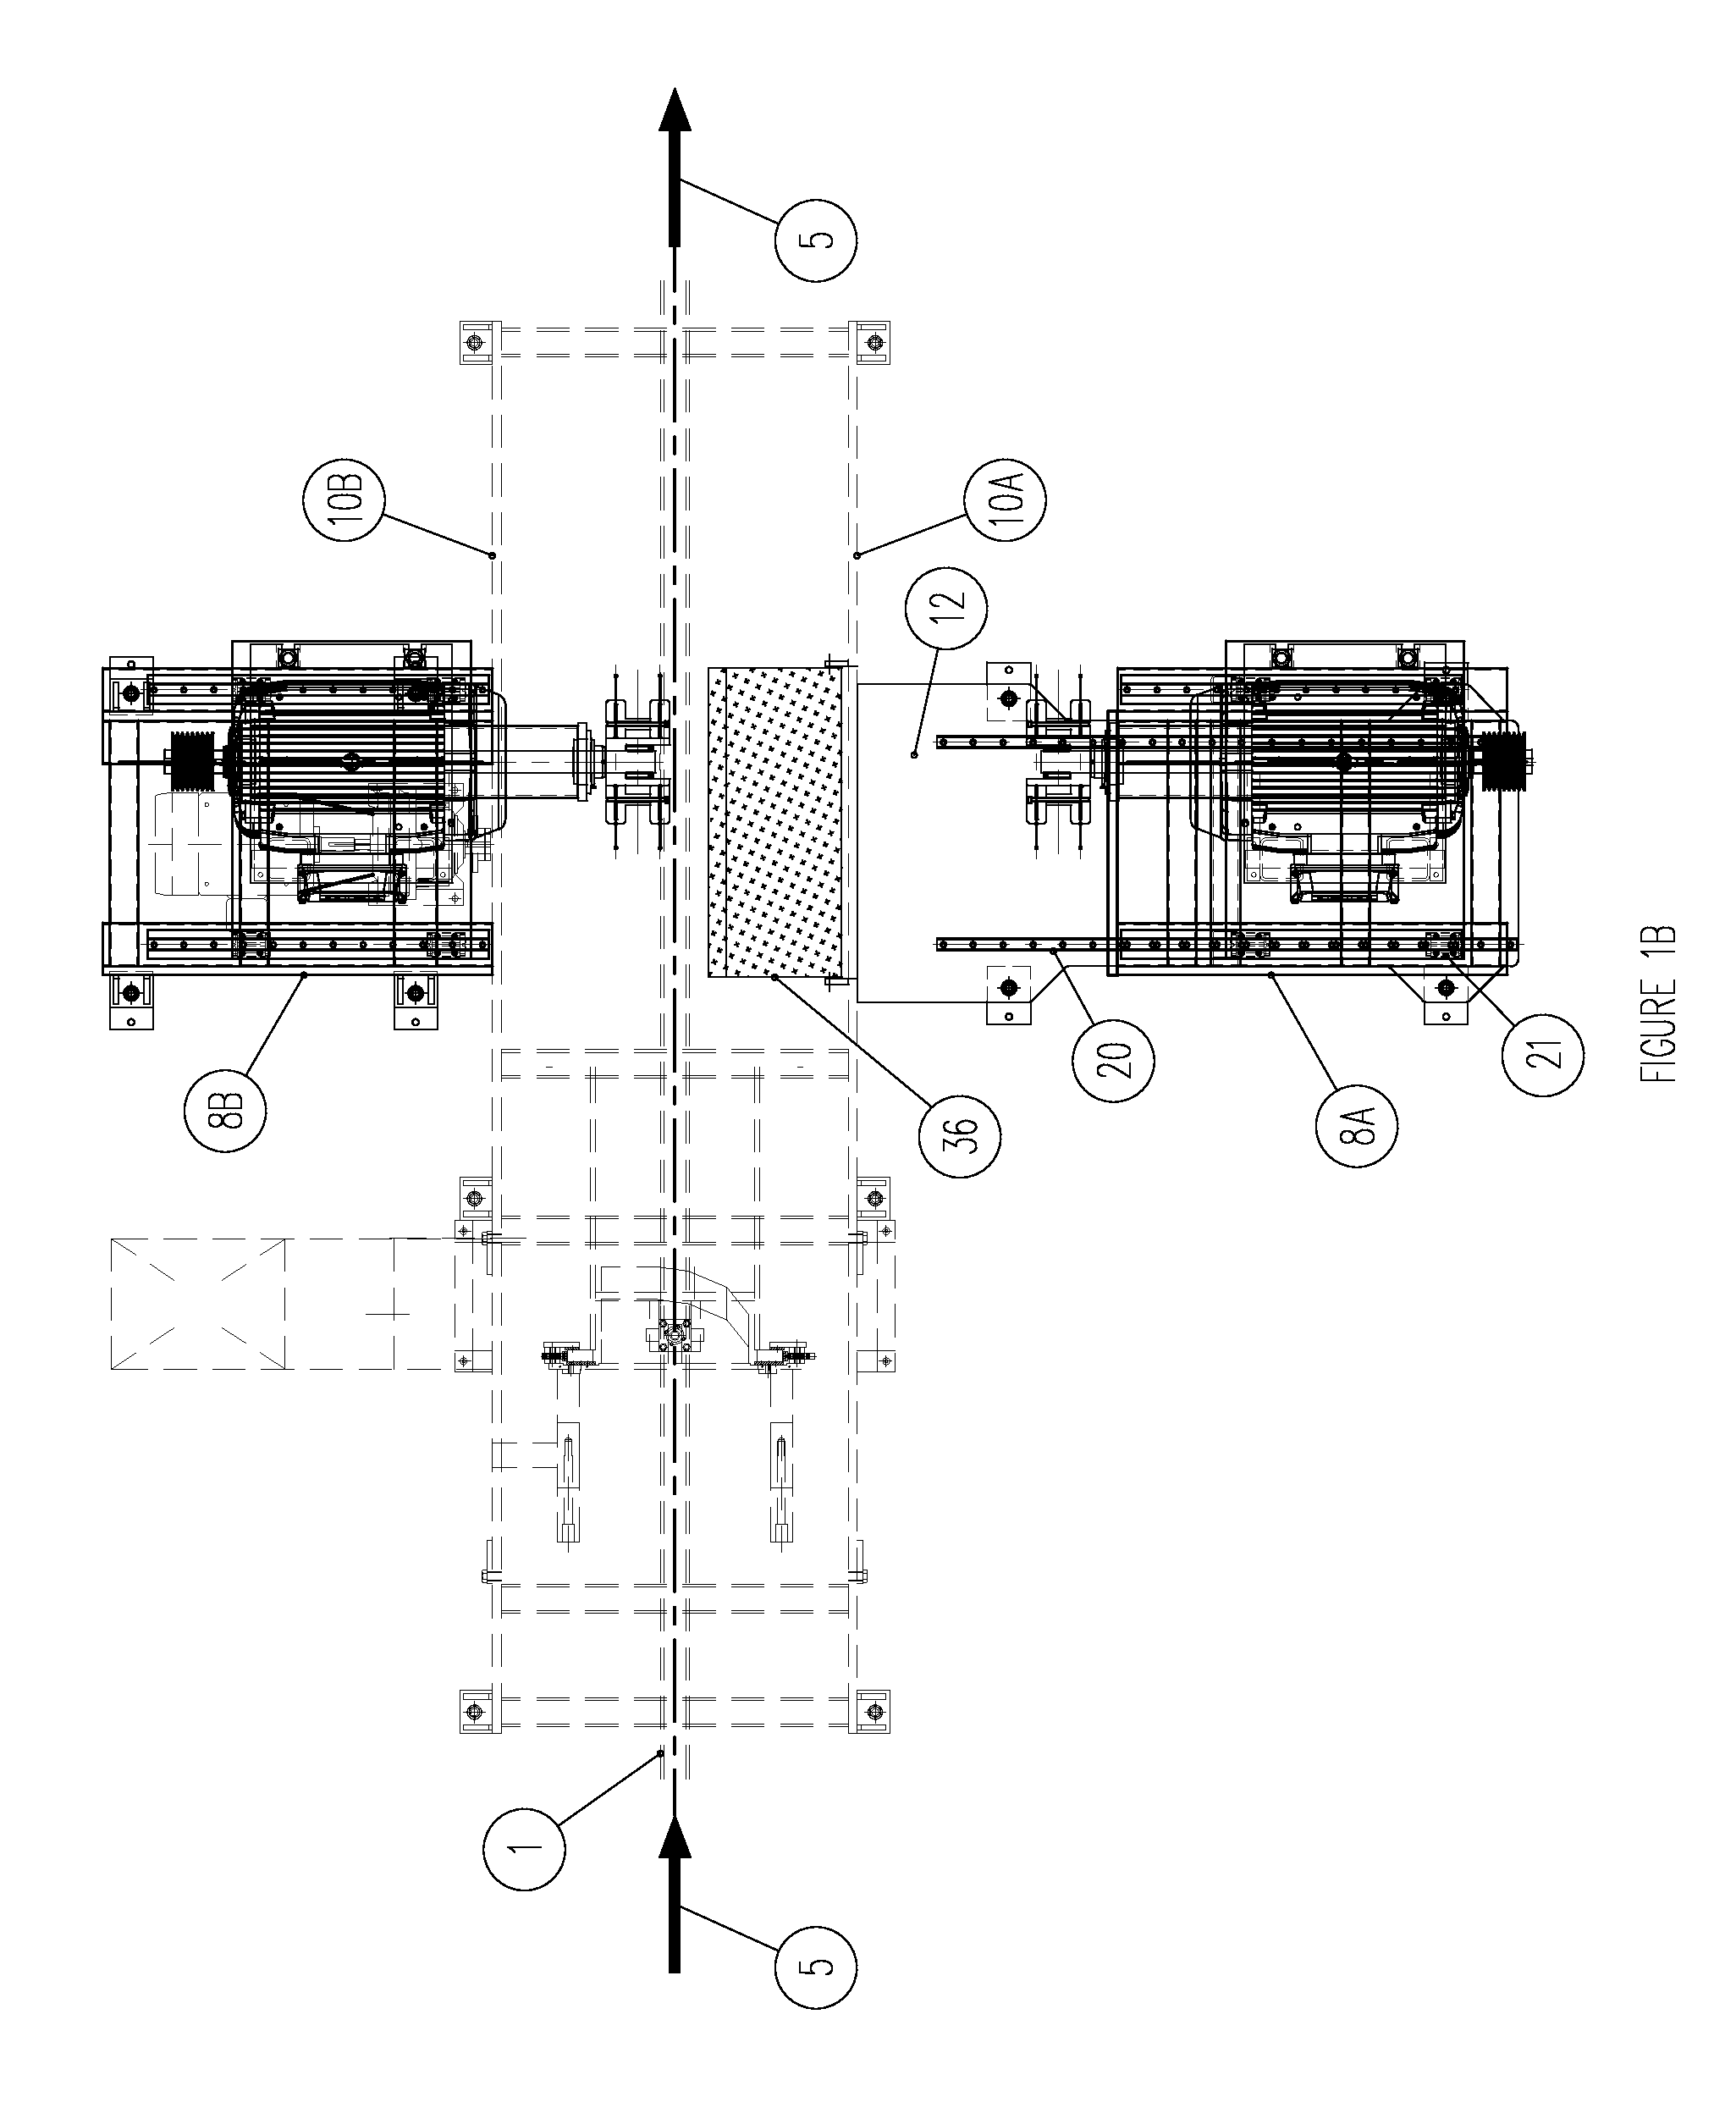 Lumber edger having accessible saws and method of accessing lumber edger saws